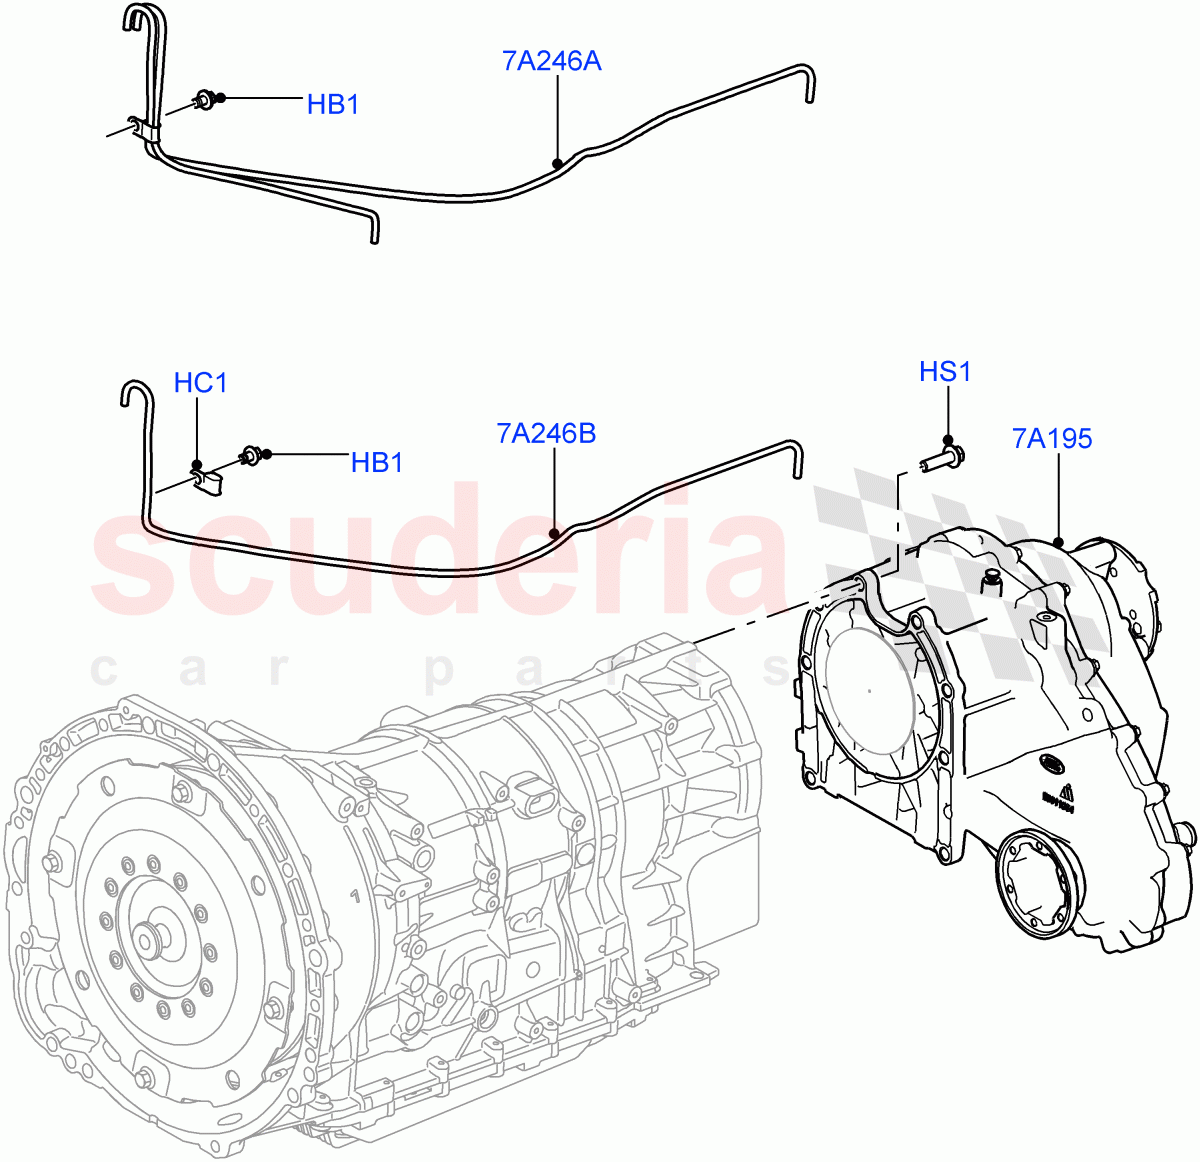 Transfer Drive Case(8 Speed Auto Trans ZF 8HP45,With 1 Speed Transfer Case,8 Speed Auto Trans ZF 8HP70 4WD)((V)FROMEA000001,(V)TOGA999999) of Land Rover Land Rover Range Rover Sport (2014+) [2.0 Turbo Diesel]